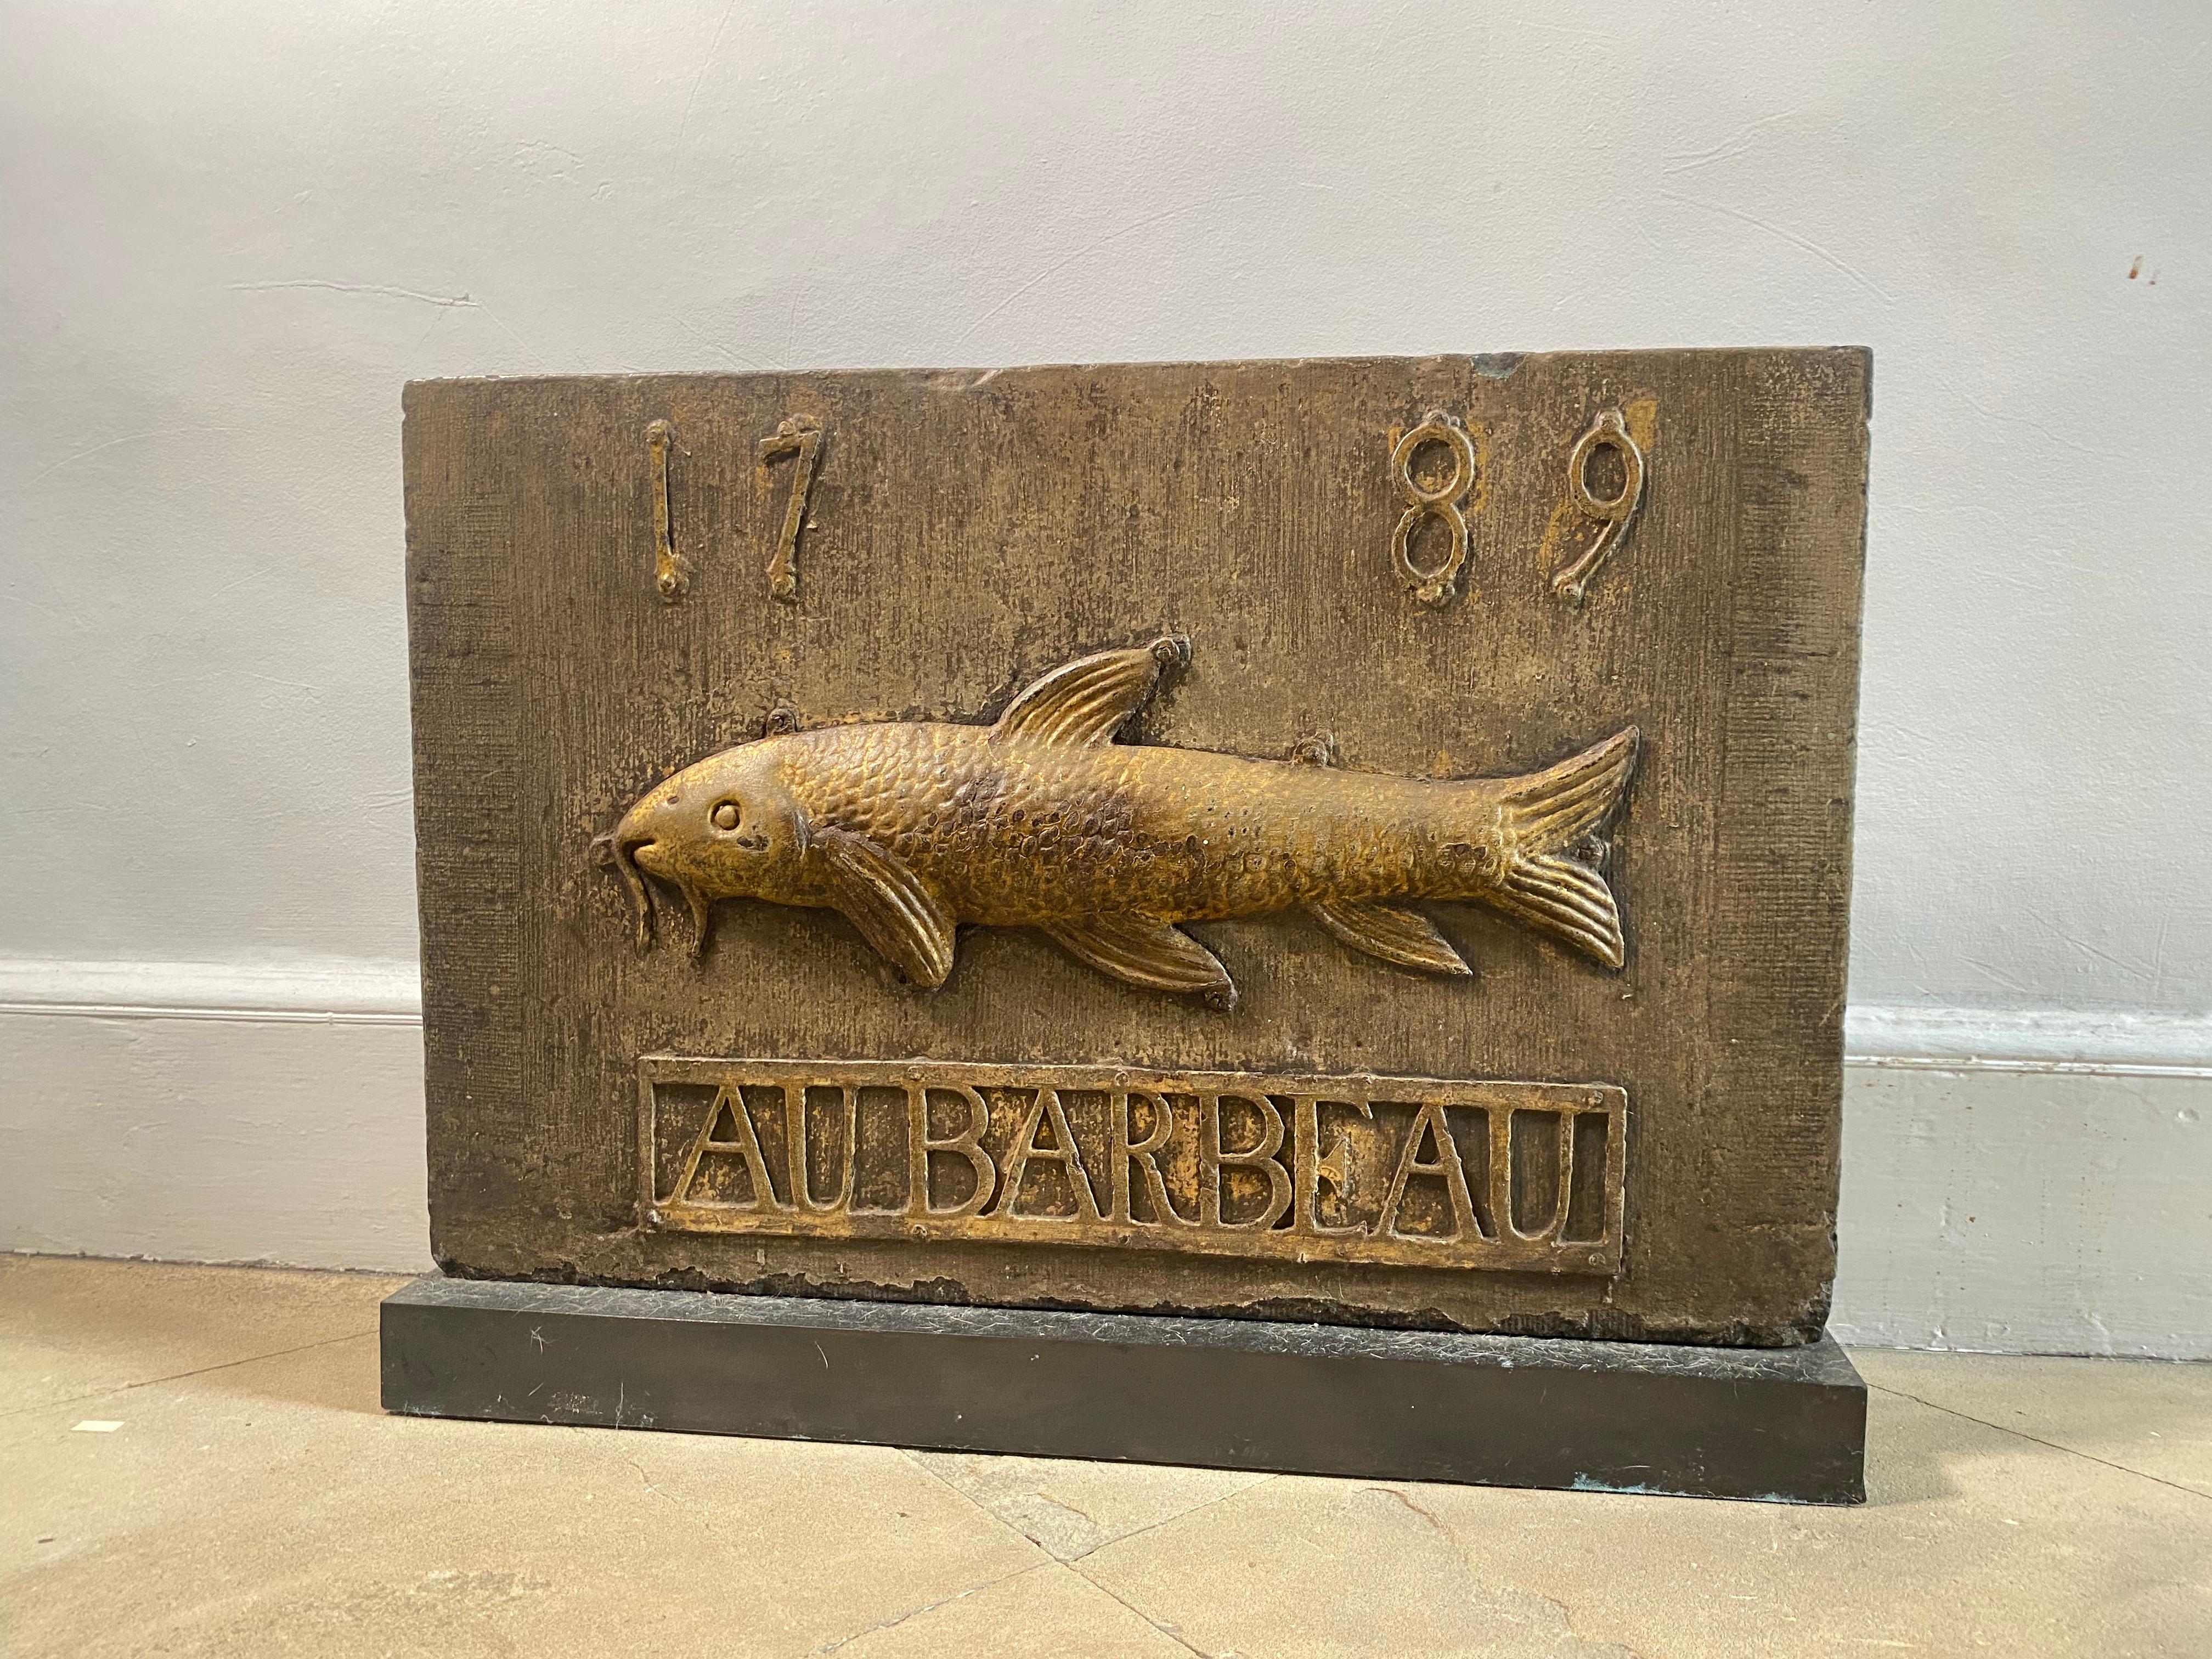 This wonderful sign dating to 1789 was previously the property of Axel Vervoordt who was the proprietor of the famous Au Barbeau fish restaurant in Antwerp.

The sign itself is a wonderful example of 18th century advertising and signage - The